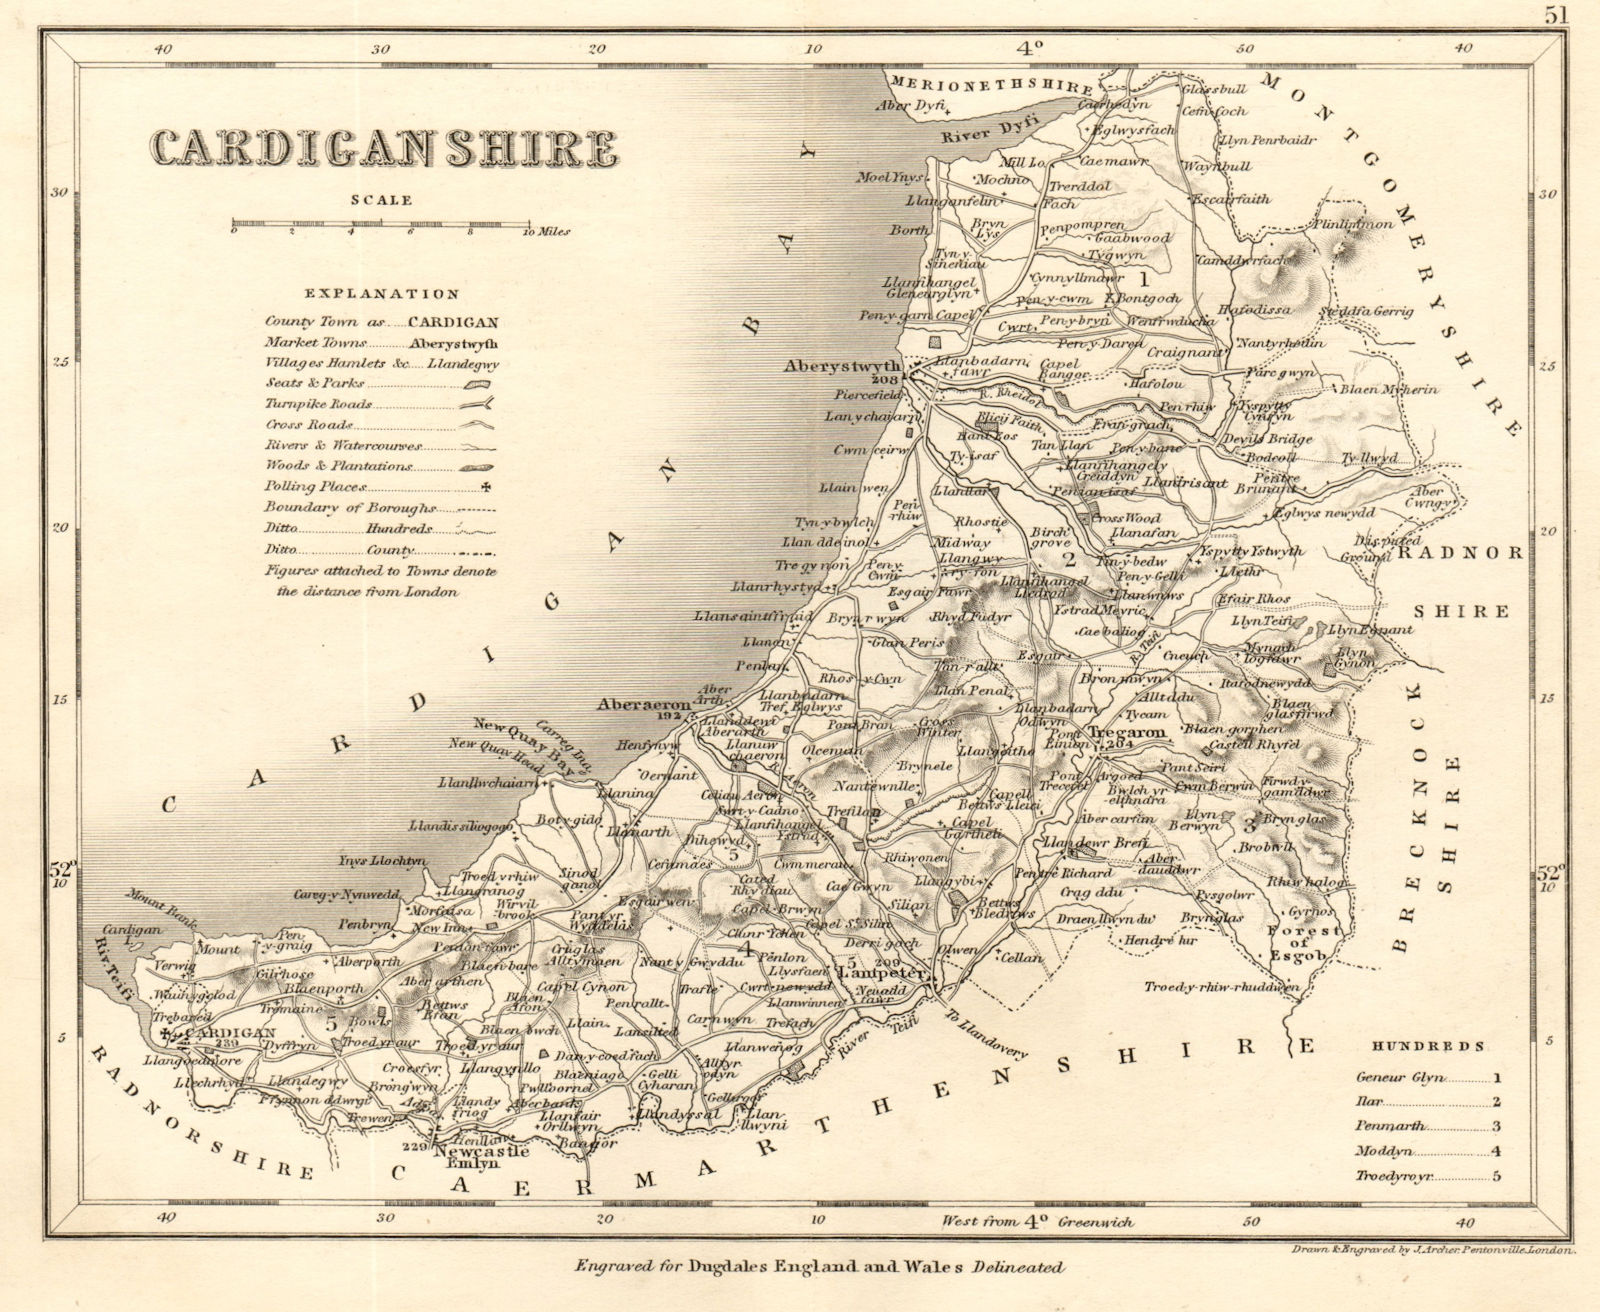 Associate Product CARDIGANSHIRE county map by DUGDALE/ARCHER. Seats canals polling places 1845